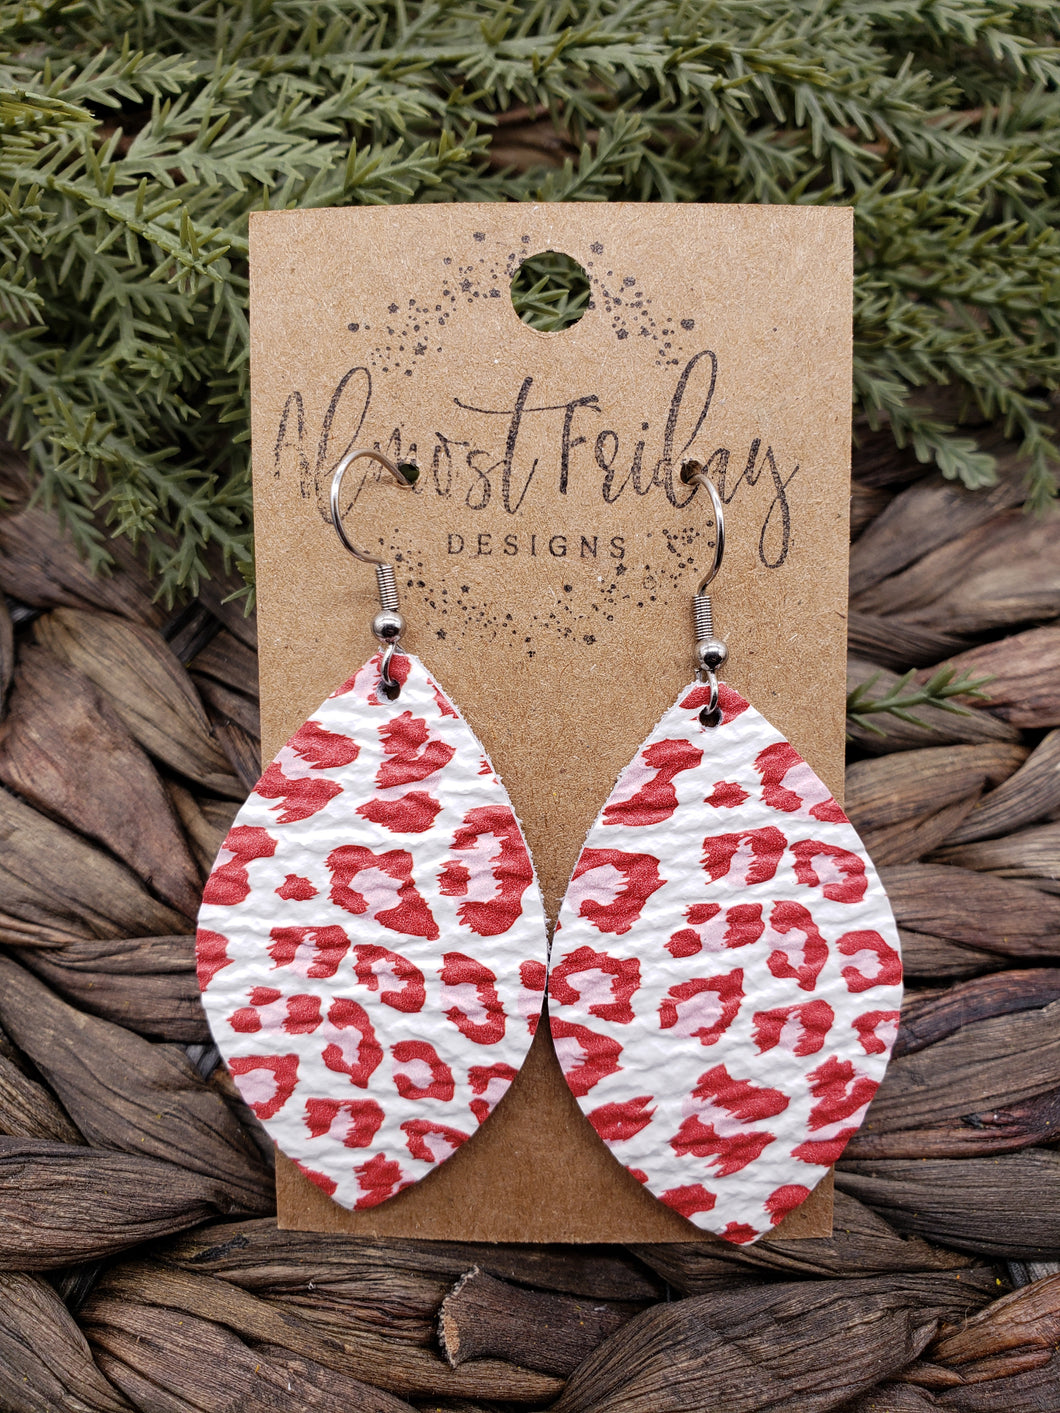 Genuine Leather Earrings - Leaf Cut - Pink - Red - Leopard - Animal Print - Valentine's Day - Textured Leather - Statement Earrings